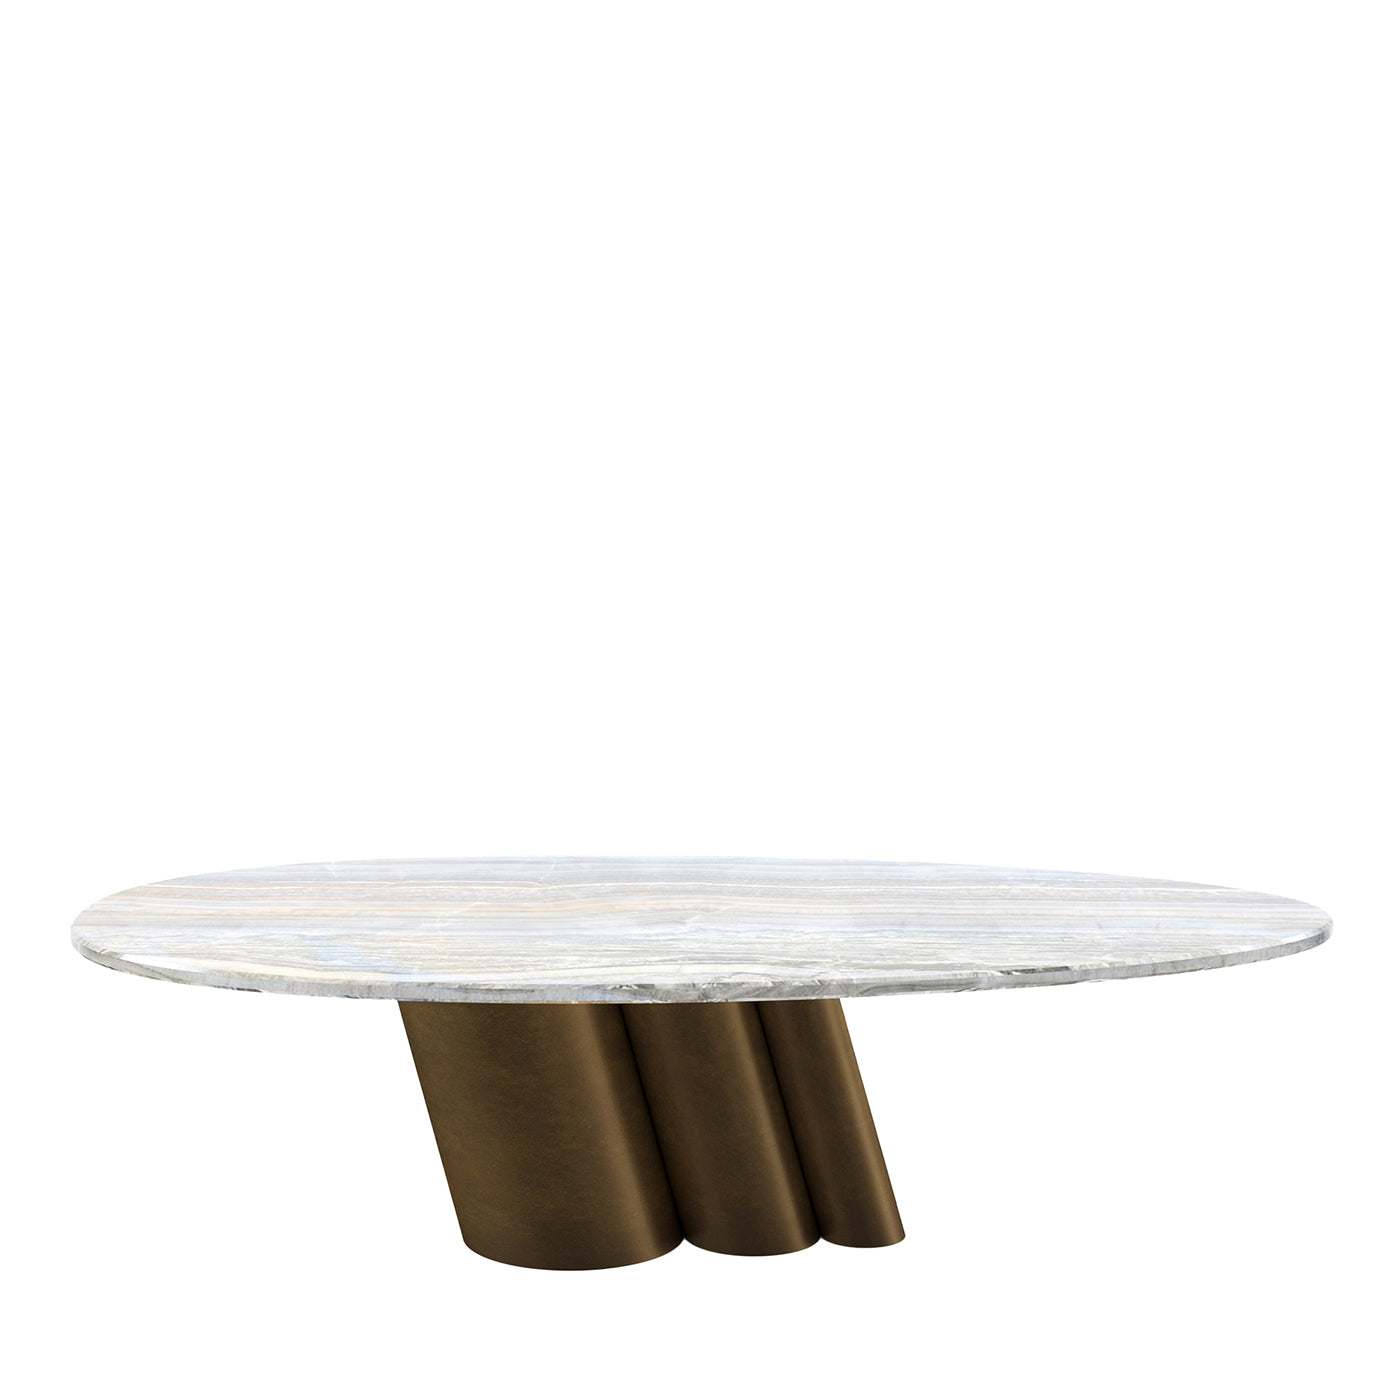 Cloe Onice Velluto Marble Coffee Table by Paolo Ciacci - Main view